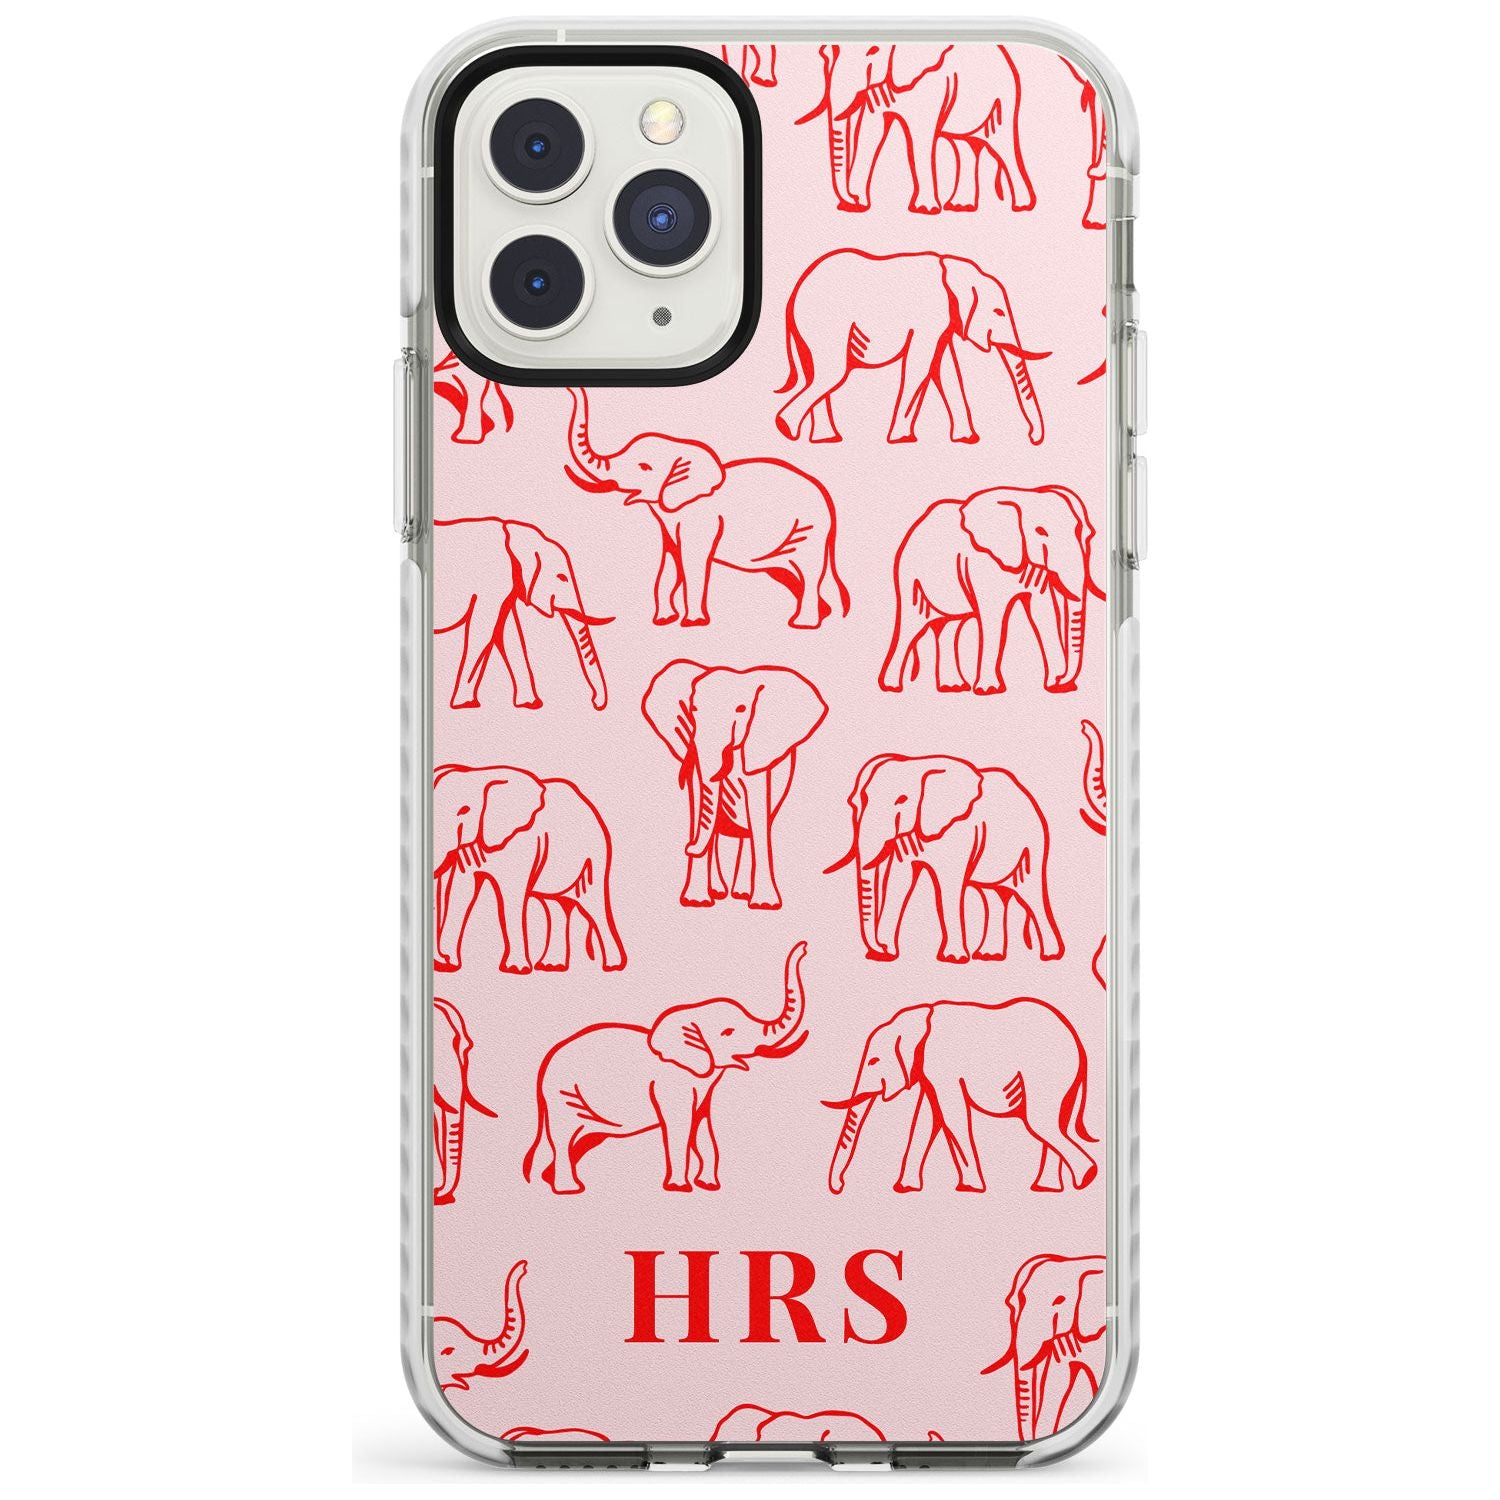 Personalised Red Elephant Outlines on Pink Impact Phone Case for iPhone 11 Pro Max